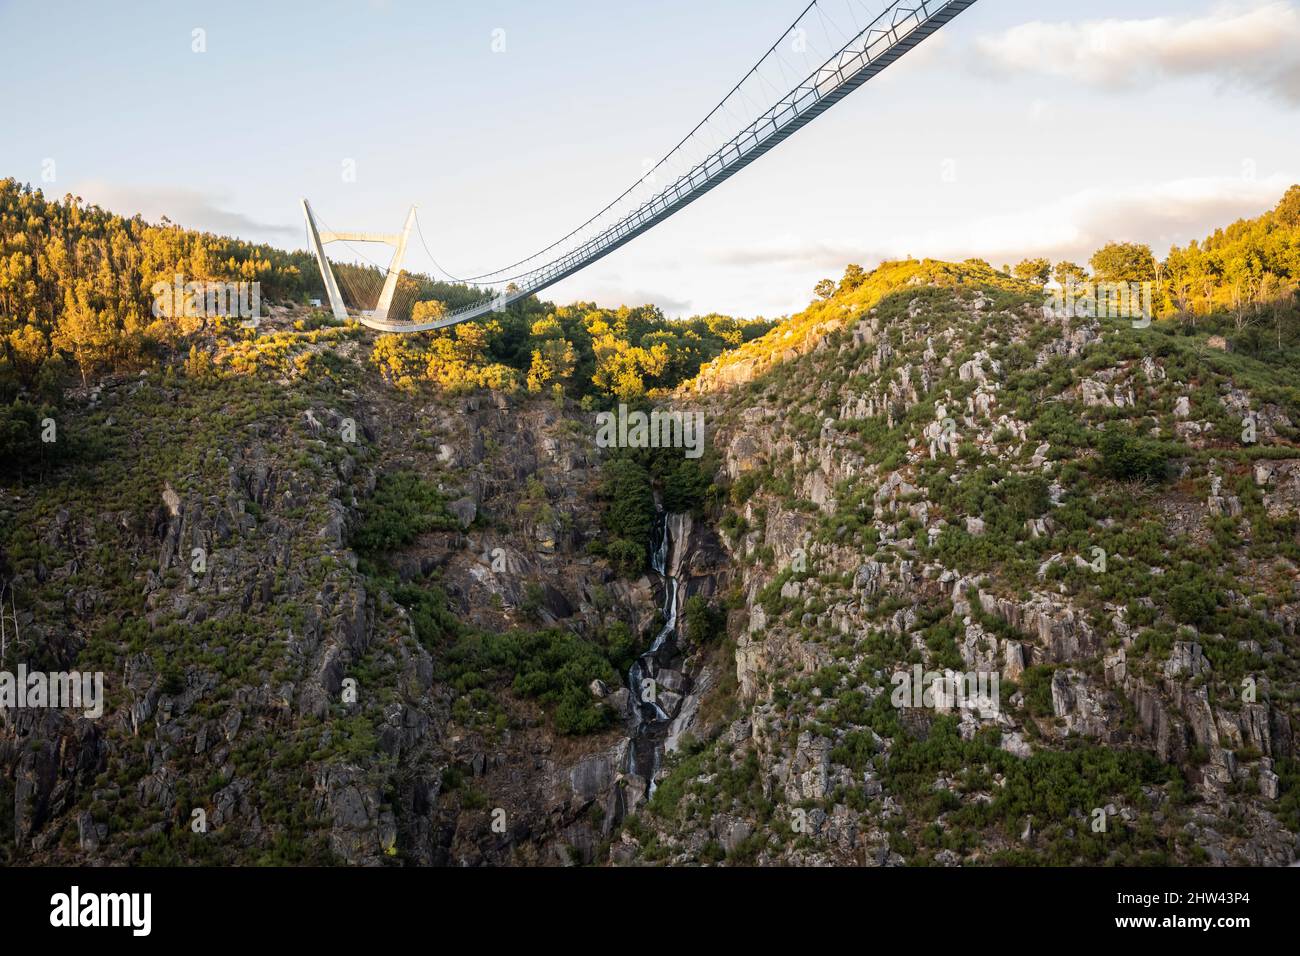 The “Passadiços do Paiva Trailhead Areinho” in Arouca Geopark, on river  Paiva, near Porto, Portugal, elected as the most innovative tourism project  in Stock Photo - Alamy